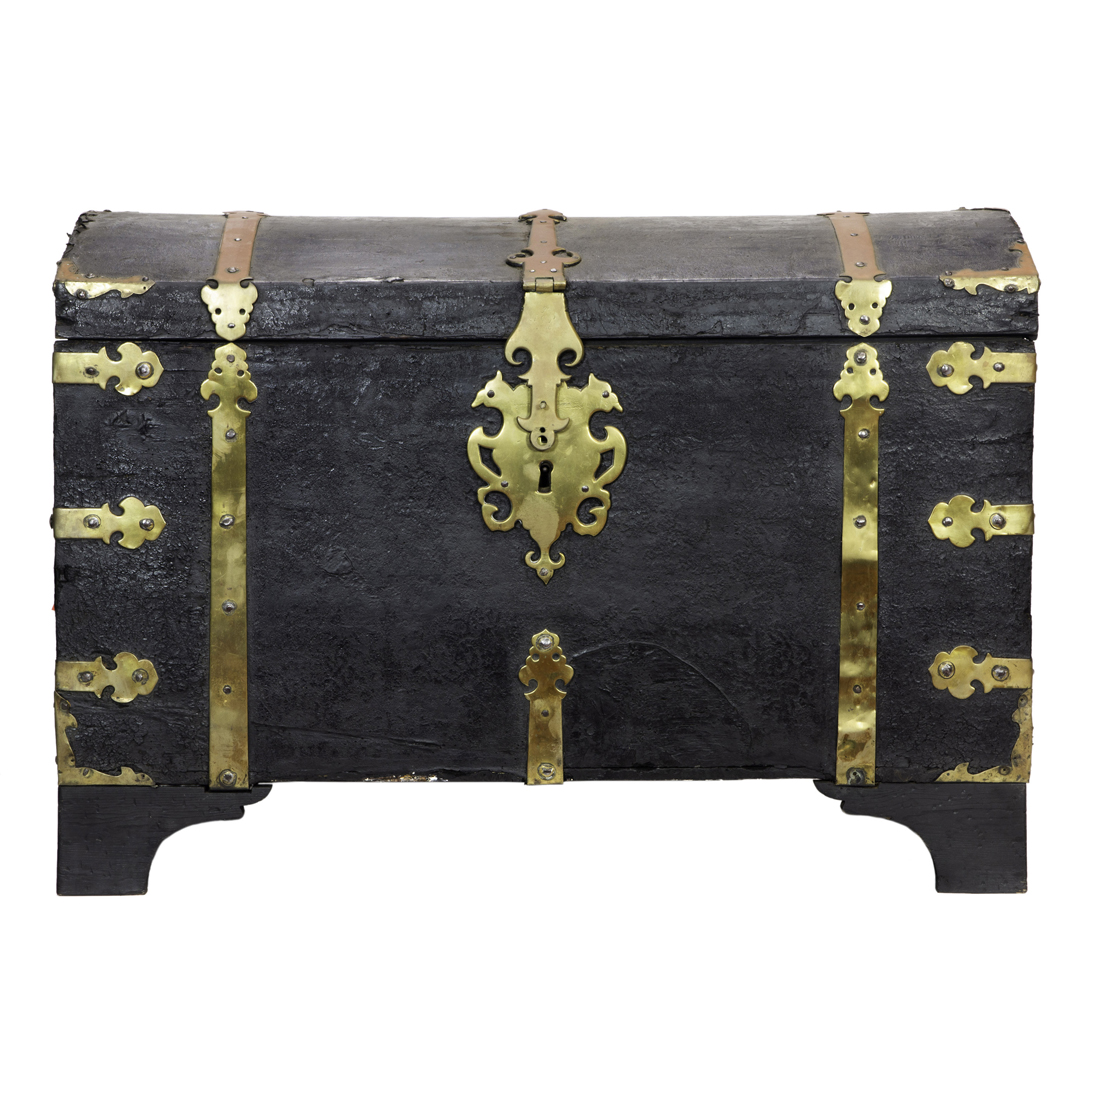 A GERMAN LEATHER AND BRASS CHEST 3a3b35